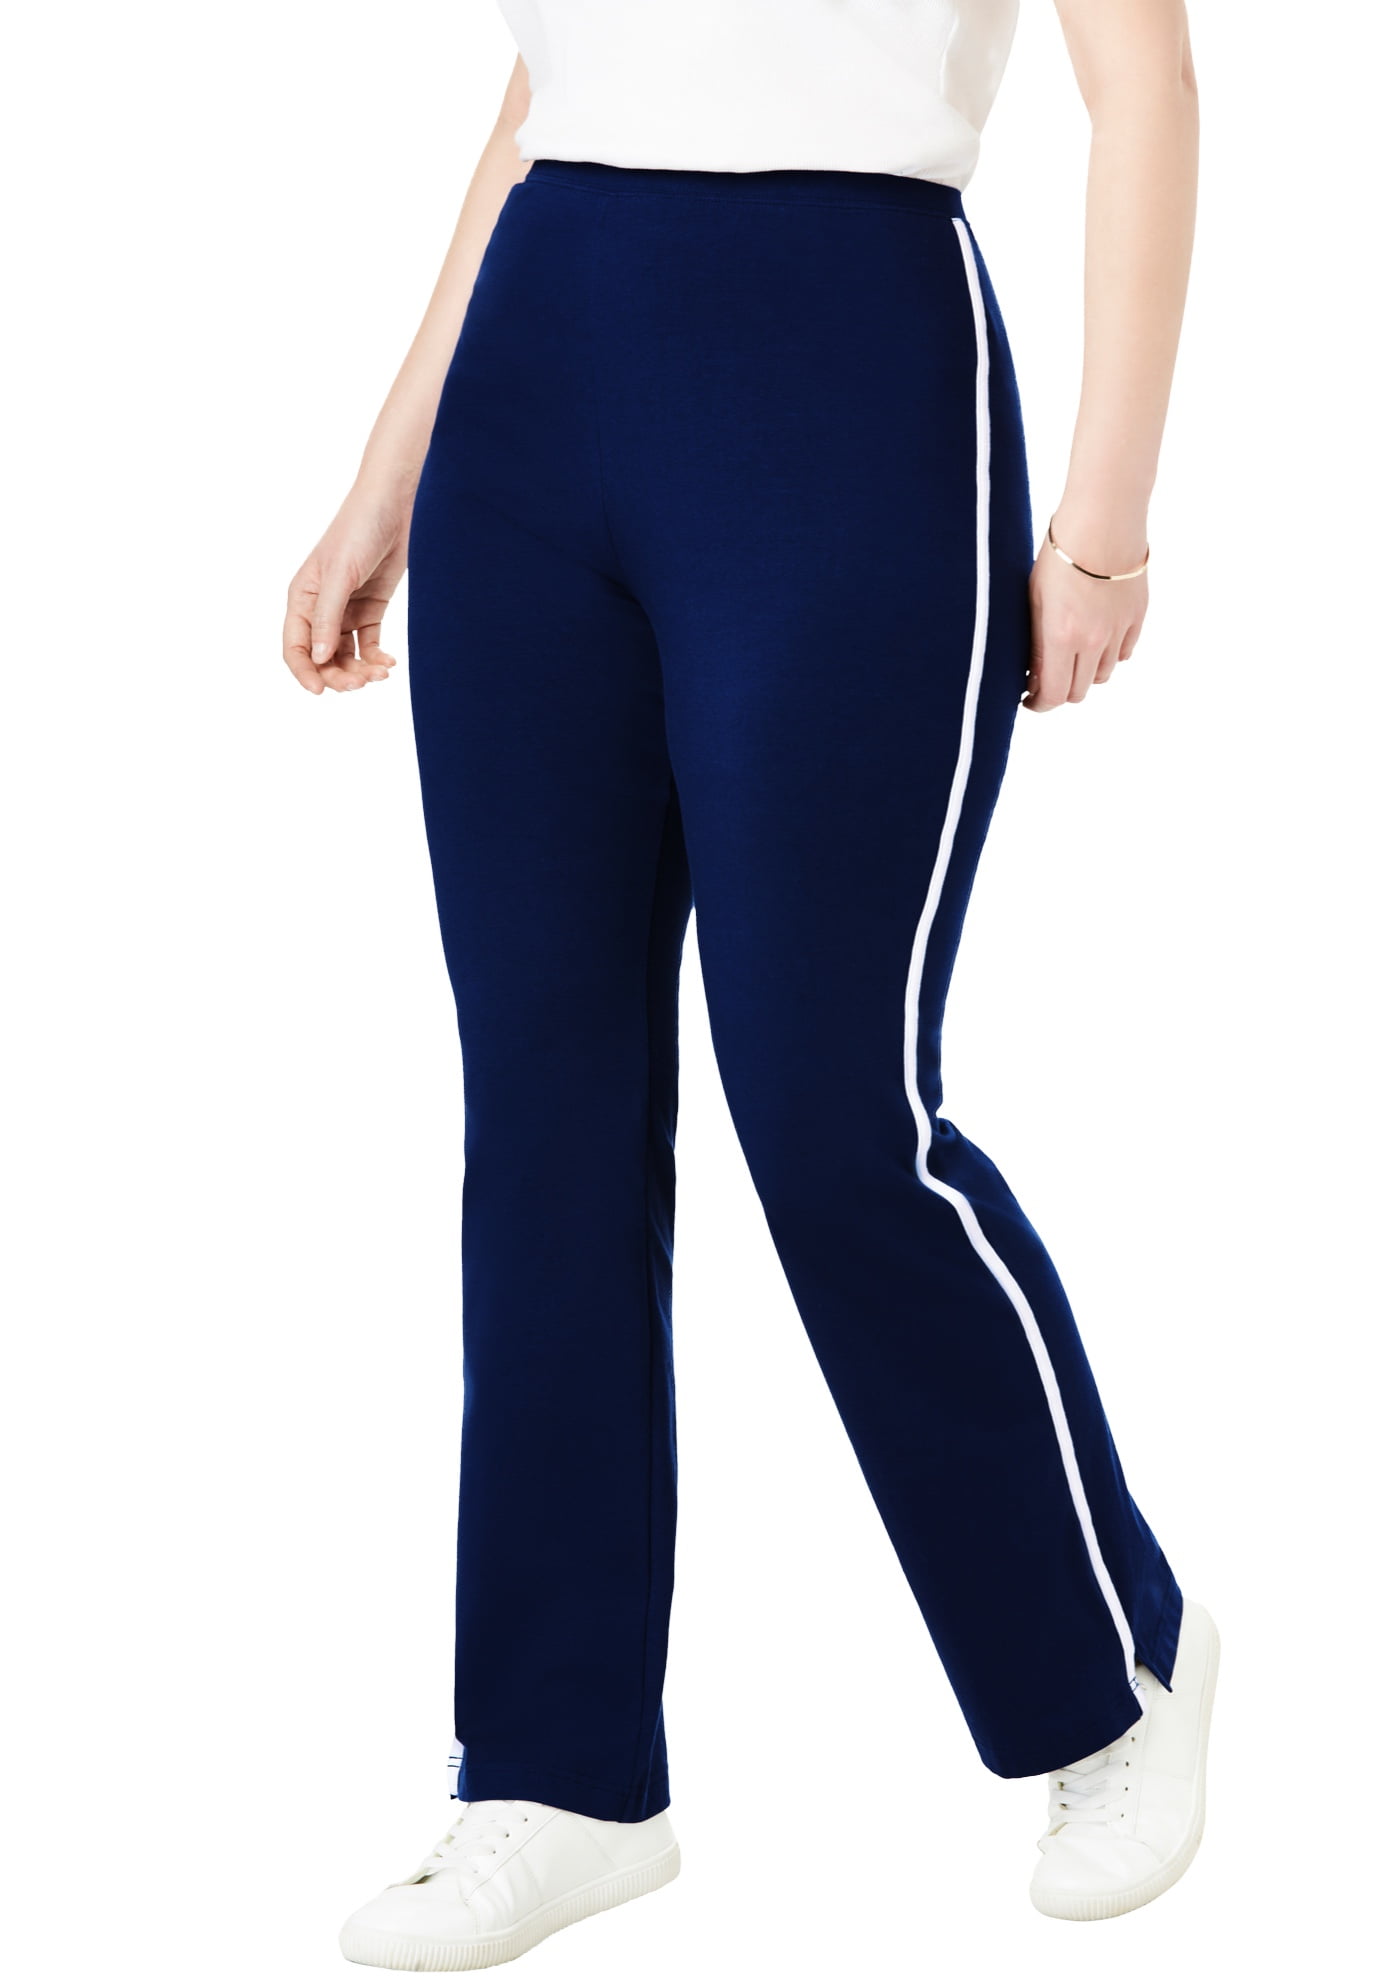 Women's Plus Size Tall Yoga Pants With